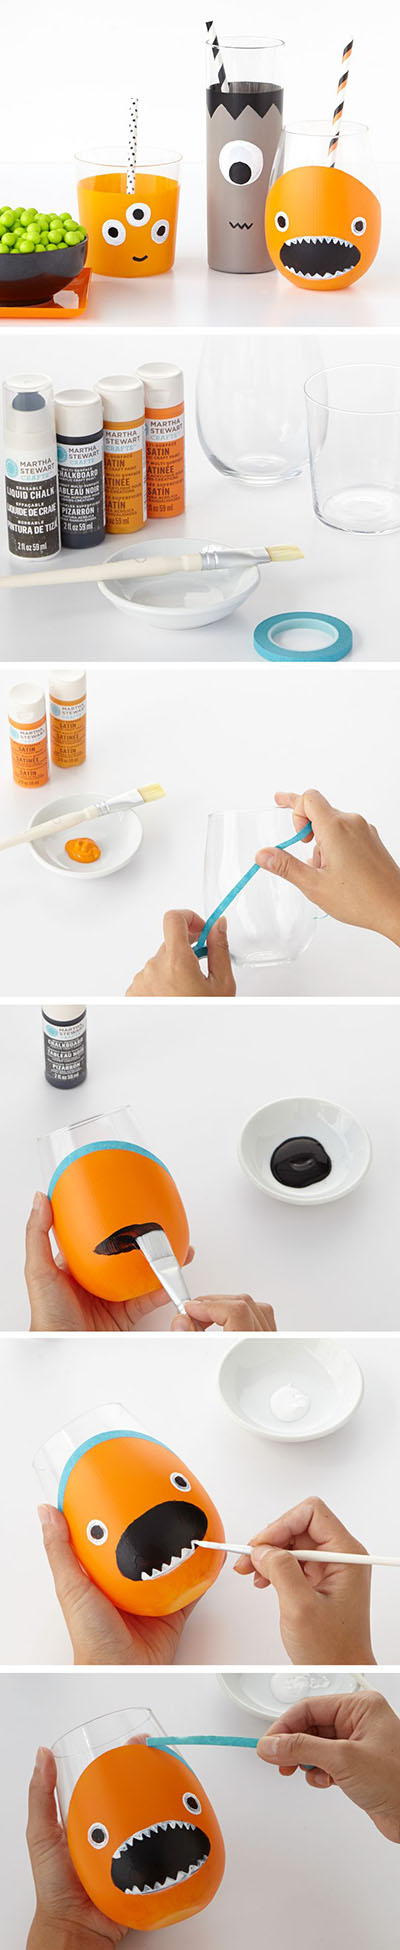 7 How to make the Halloween Monster Glasses from Martha Stewart Mad About Color6041e6a372c